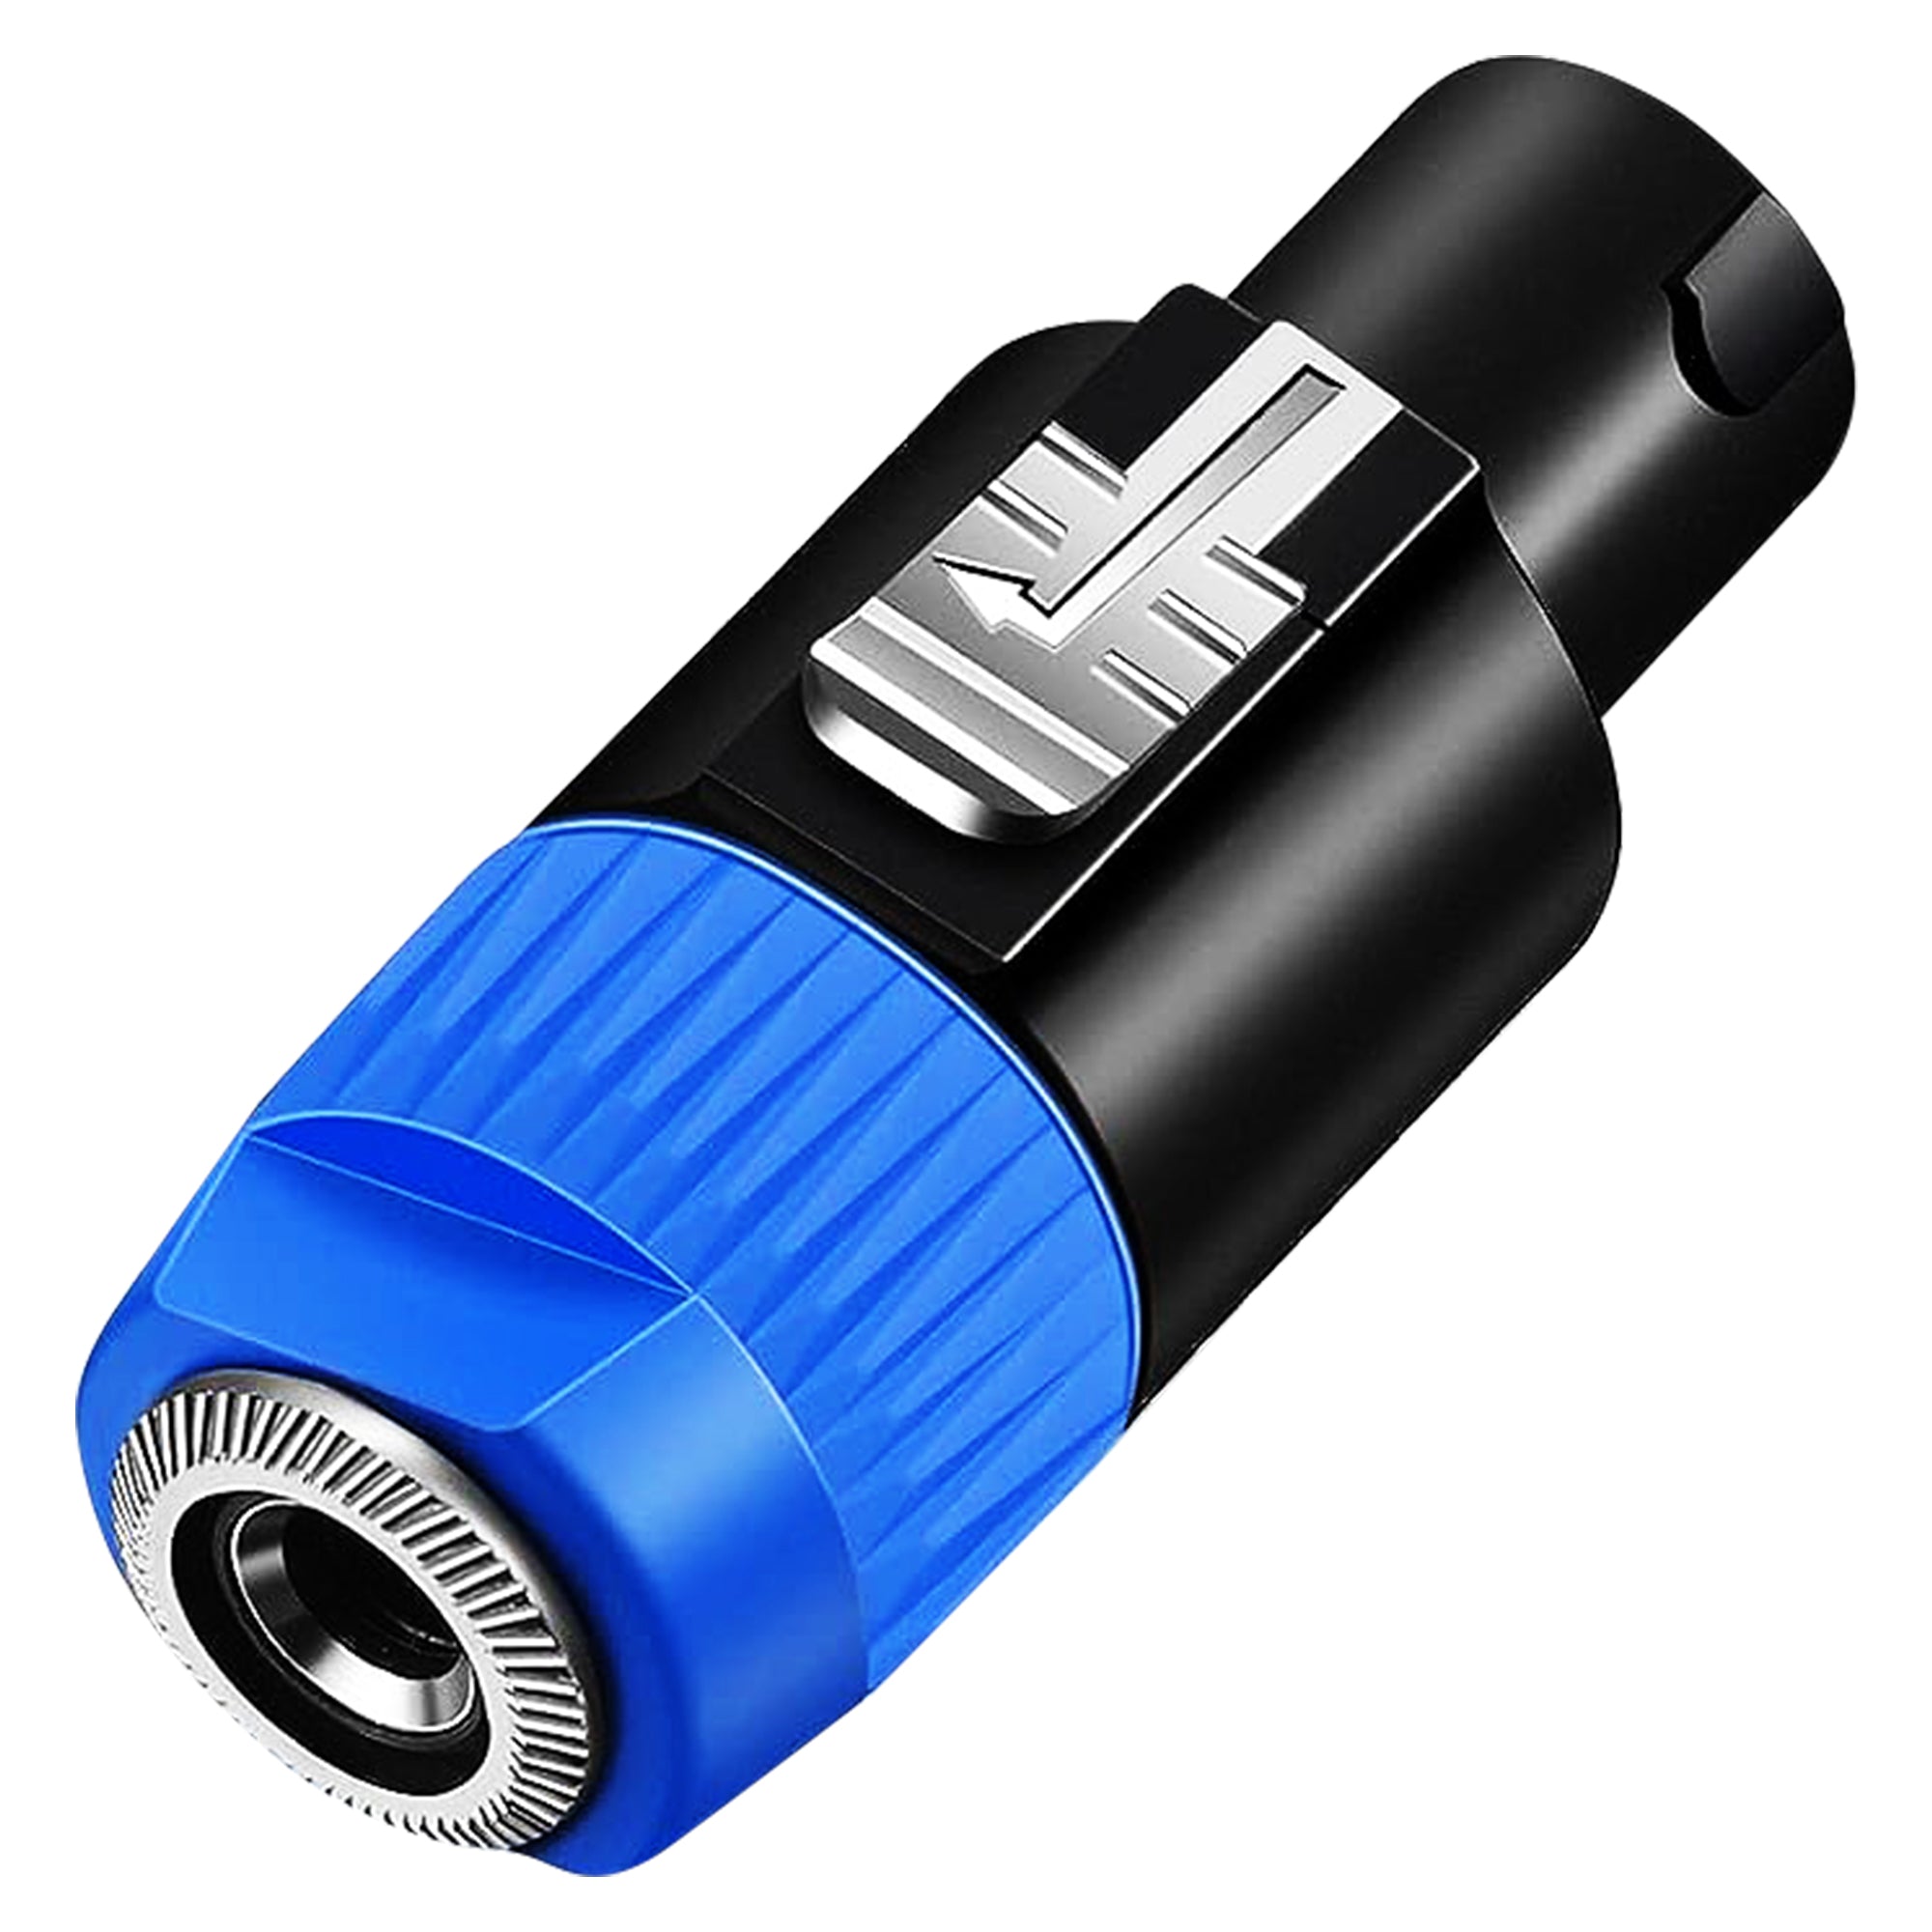 5 Core Speakon to 1/4" Adapter: High-Quality Male Audio Pin to Female Jack for Professional Speaker Connections.